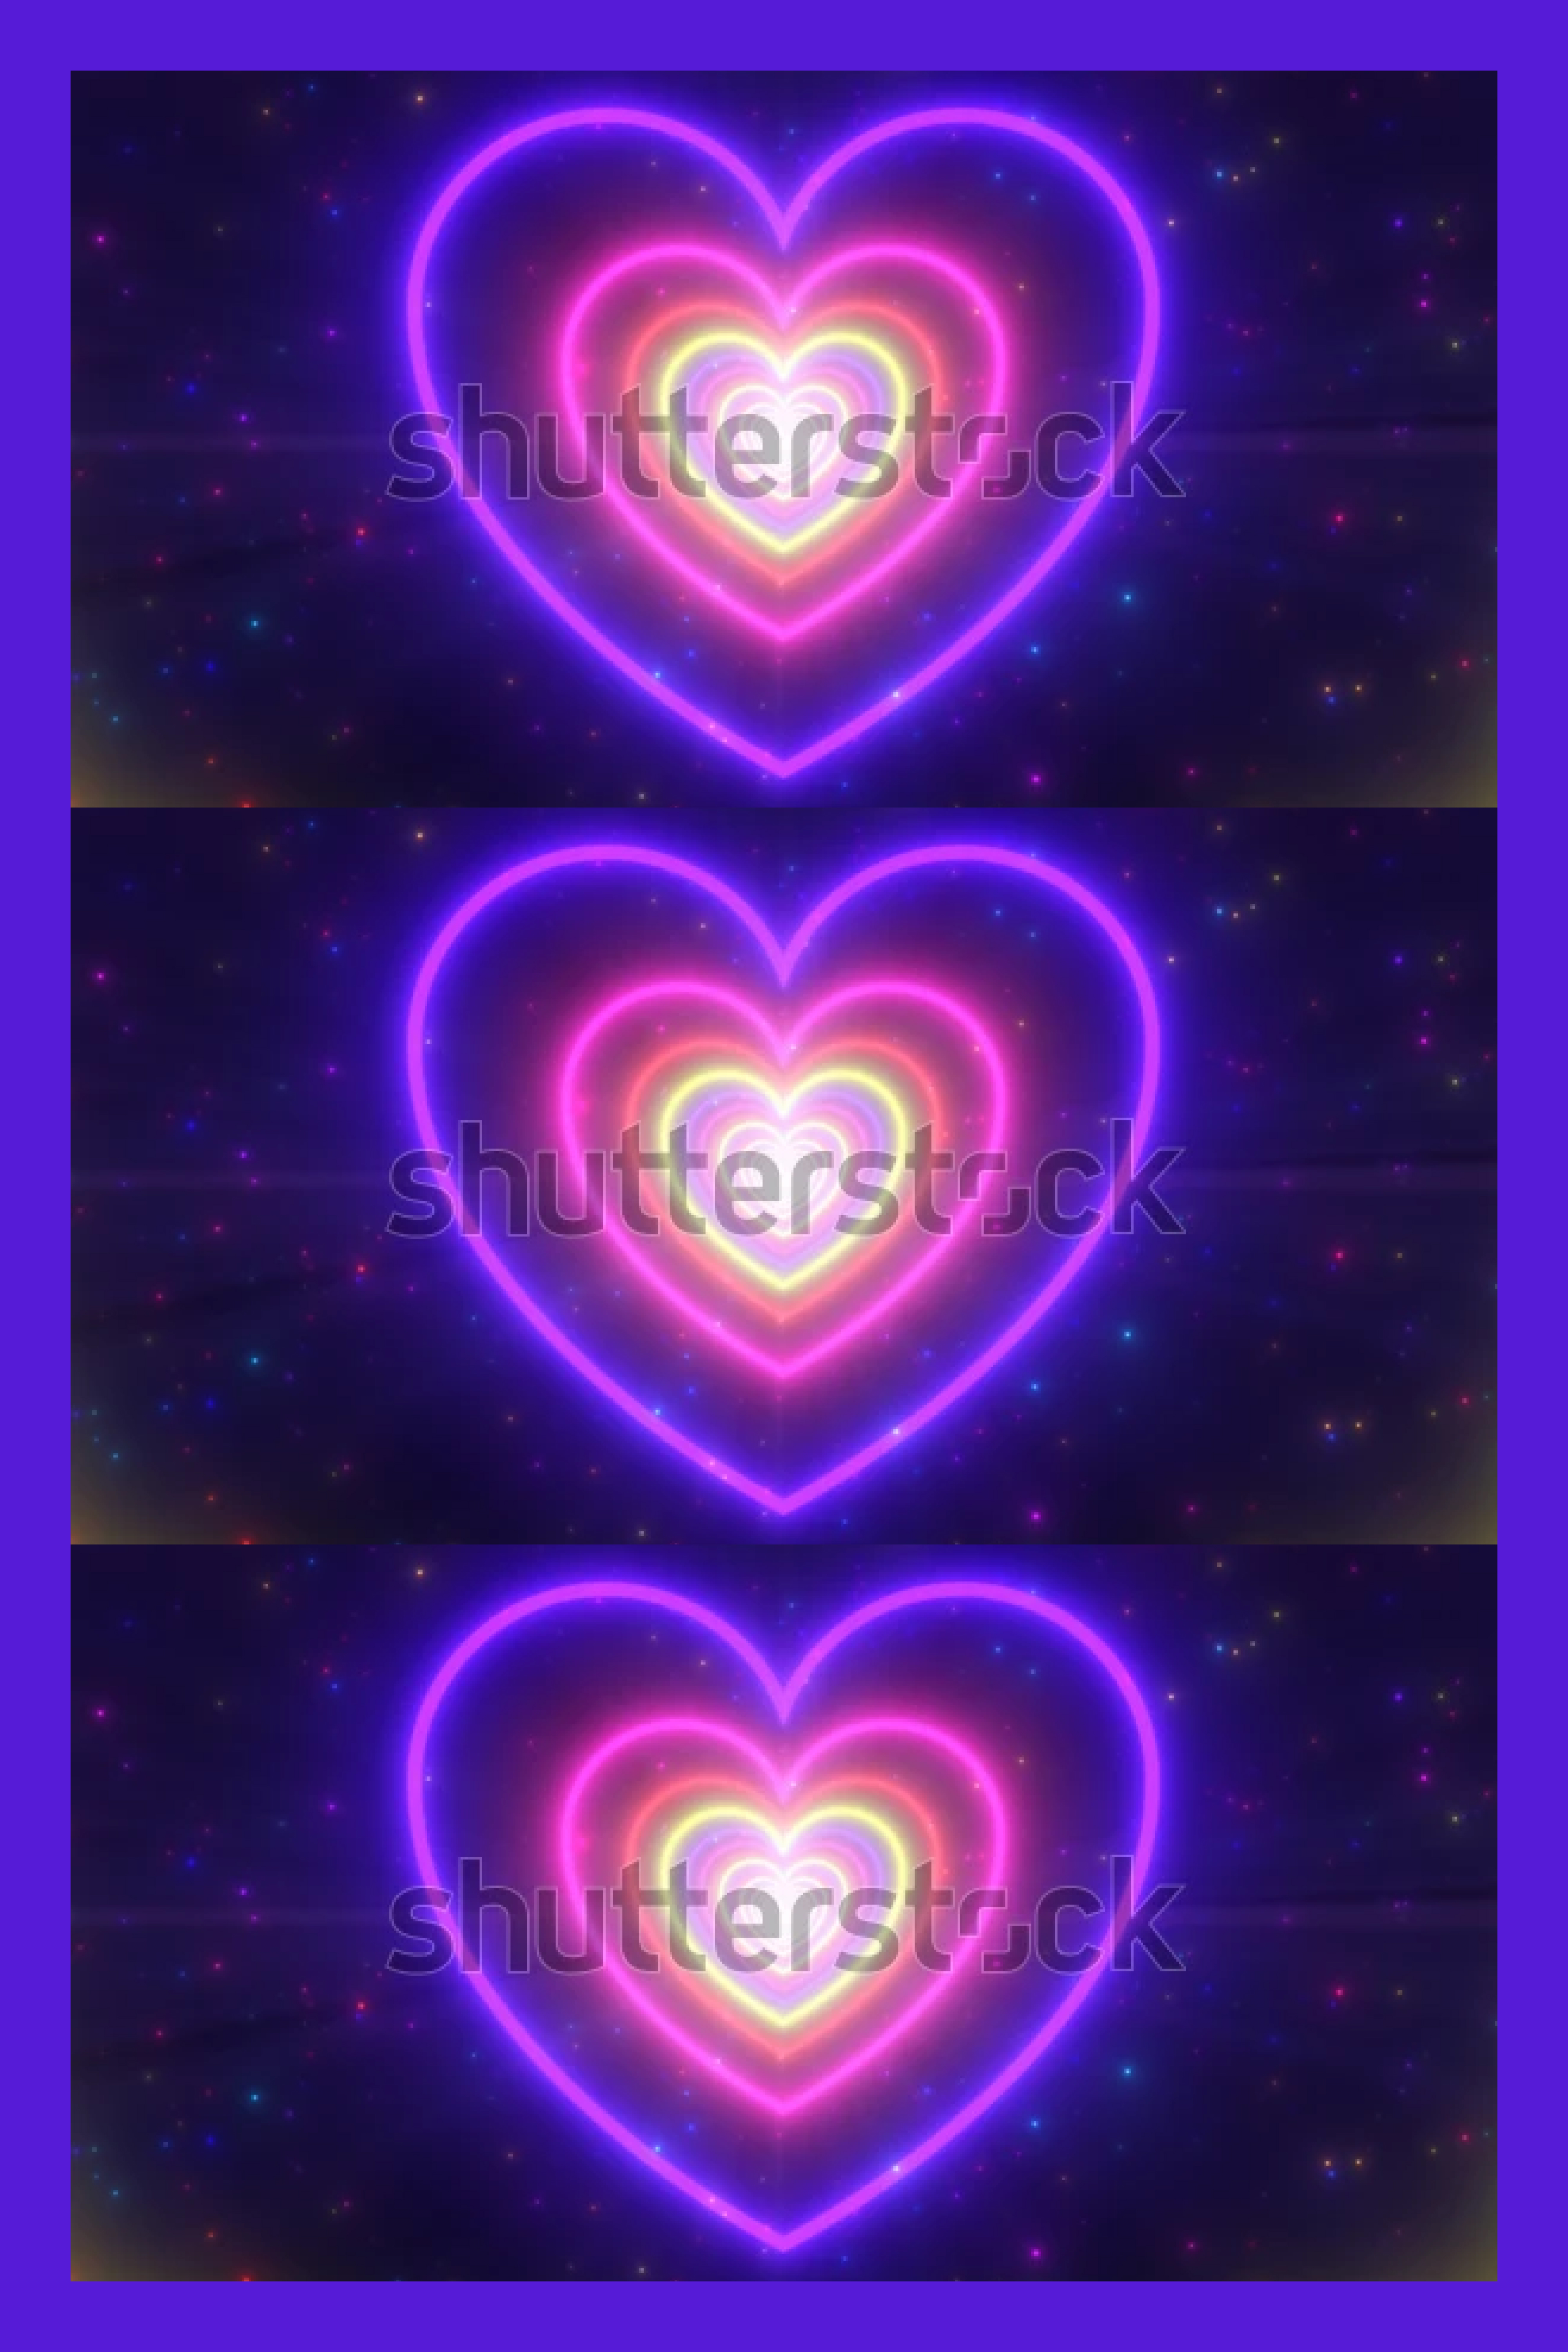 Collage of bright neon hearts on a blue background.